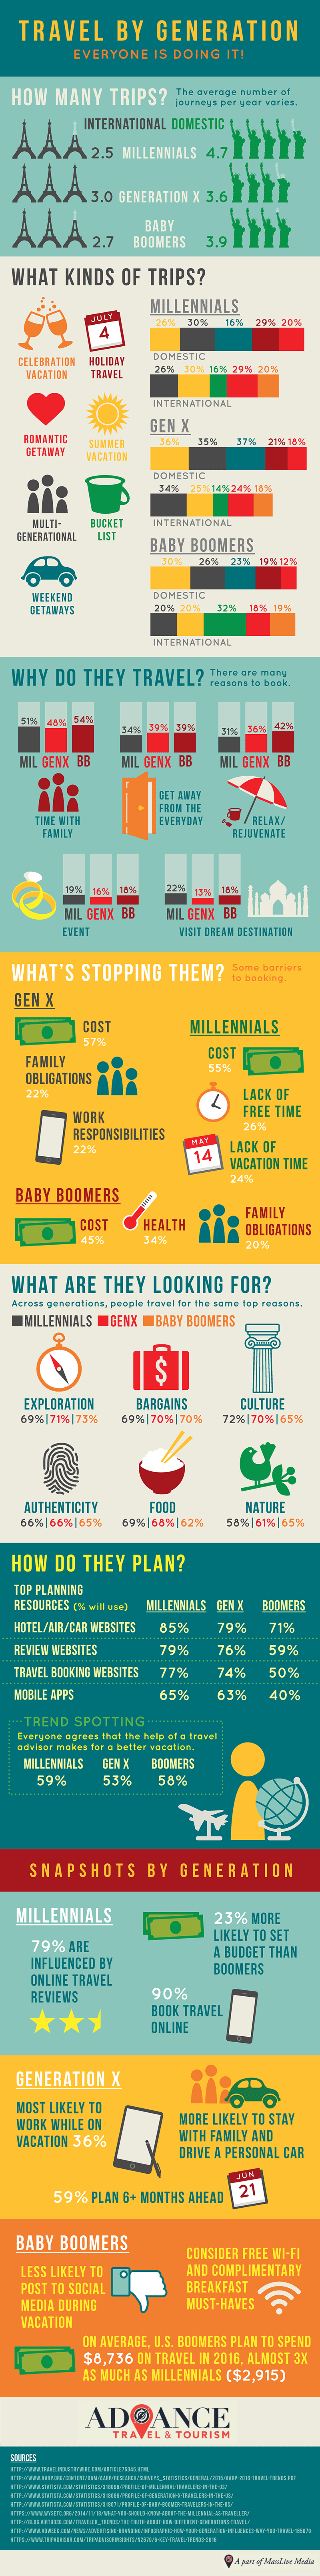 travel-by-generation-infographic4